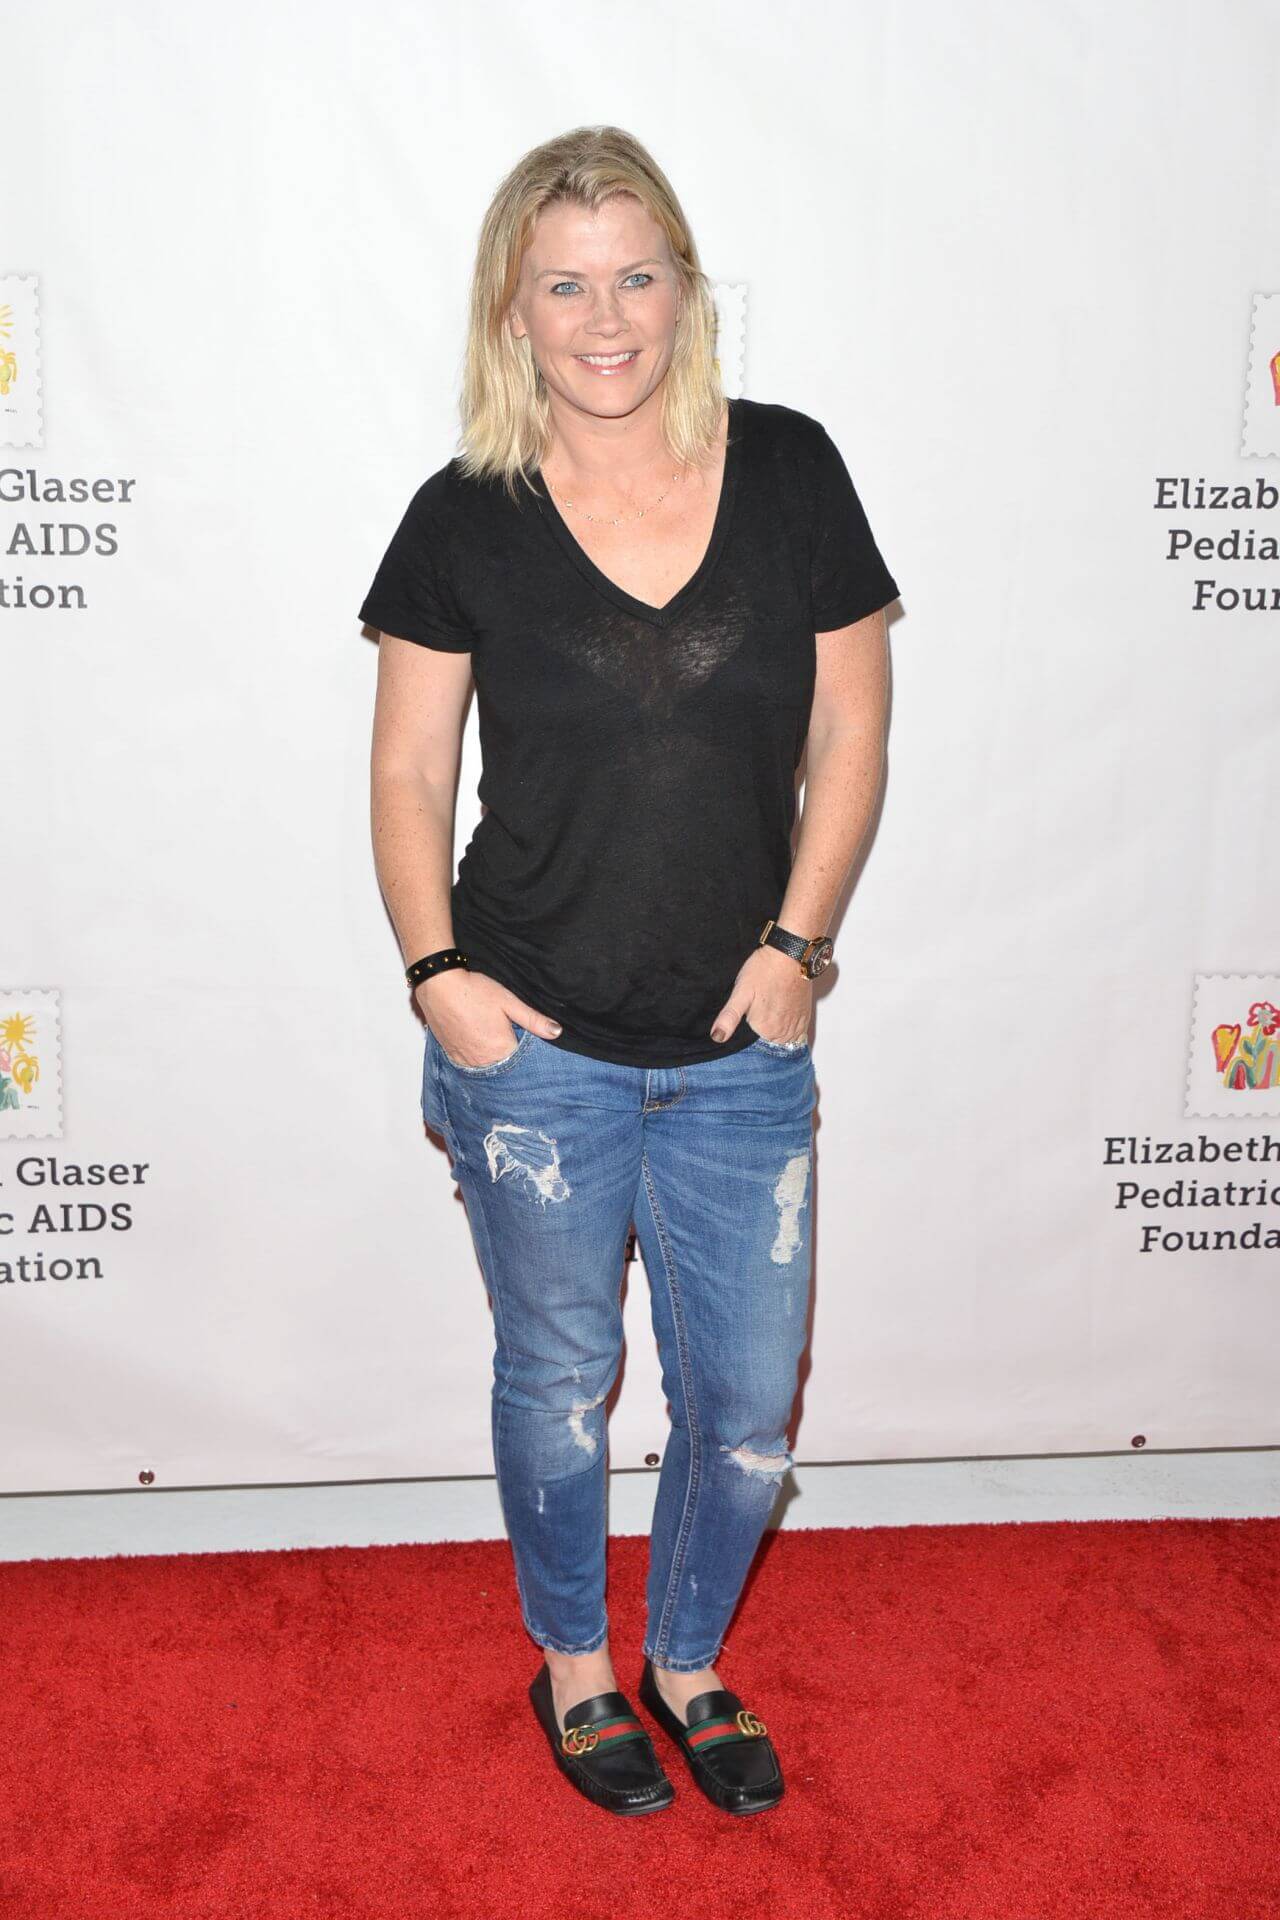 Alison Sweeney – In Black Half Sleeves Top With Denim Damaged Jeans - “A Time For Heroes” Family Festival LA